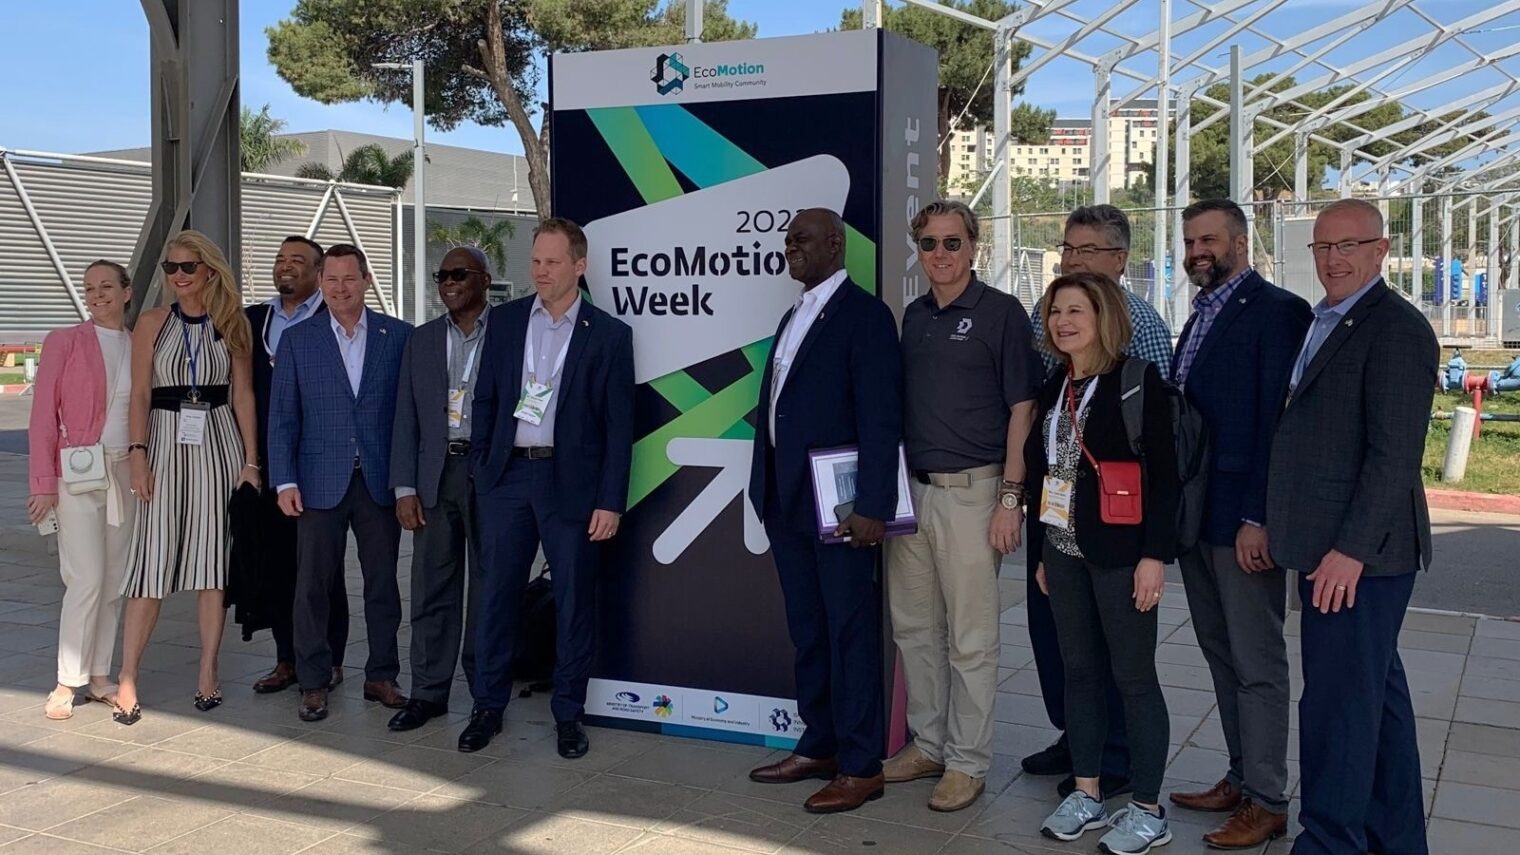 A delegation from Michigan at the 2022 EcoMotion international mobility conference in Tel Aviv. Photo courtesy of Michigan Israel Business Accelerator